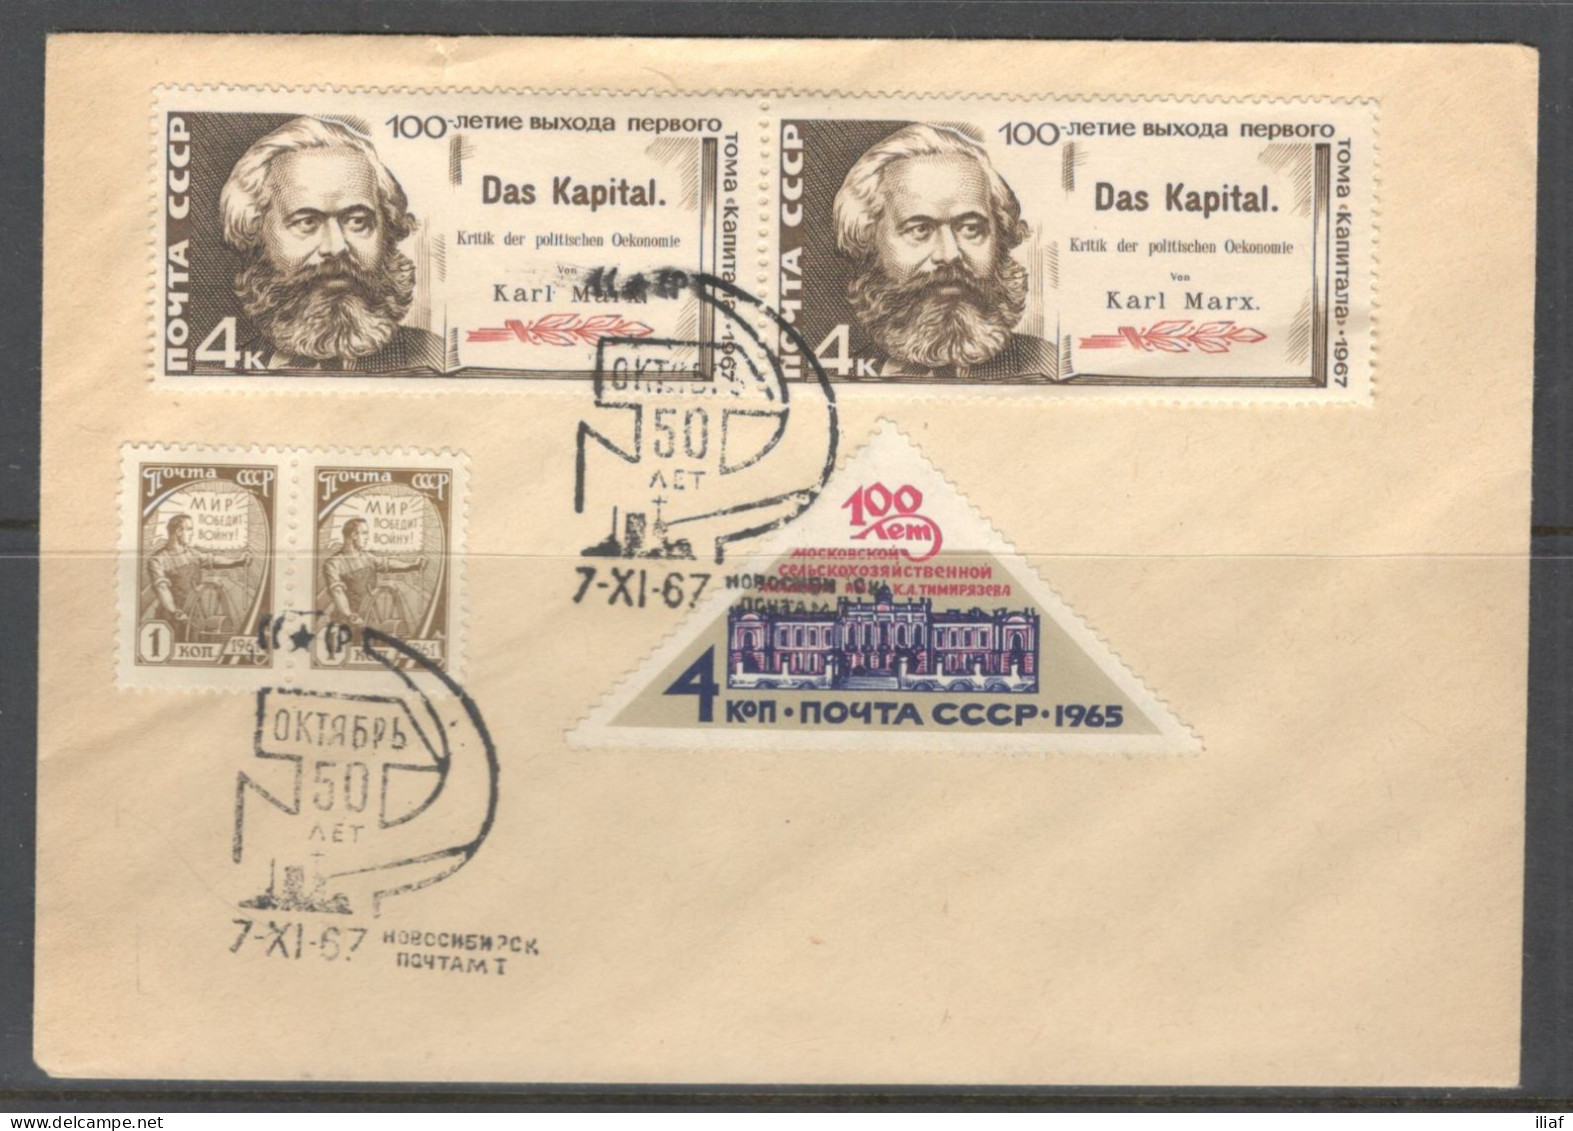 RUSSIA & USSR. 50 Years October.  Illustrated Envelope With Special Cancellation - Lettres & Documents